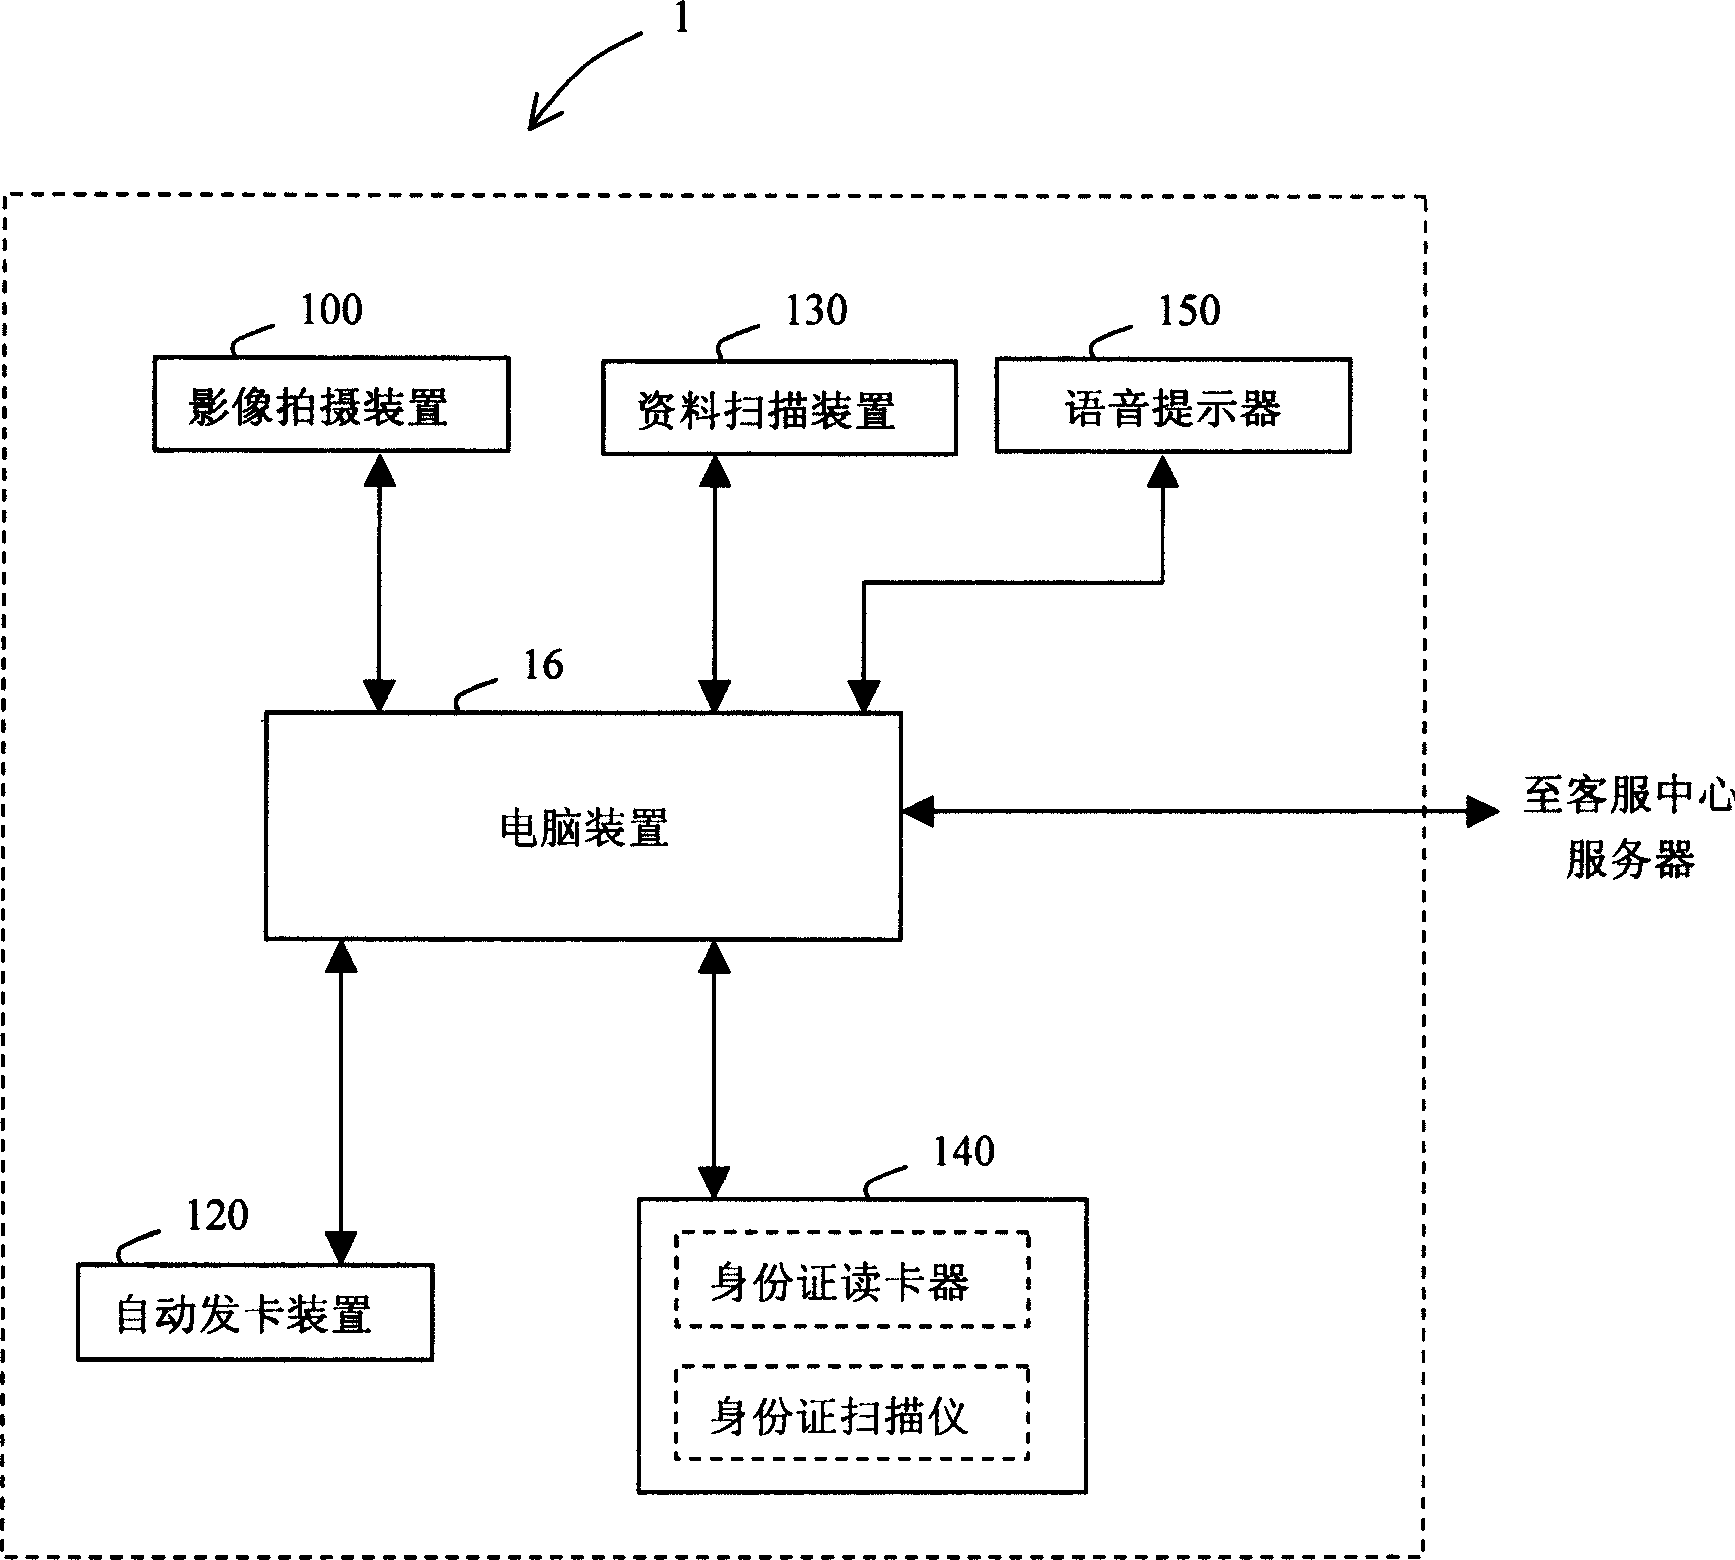 Self-service card-issueing system and method